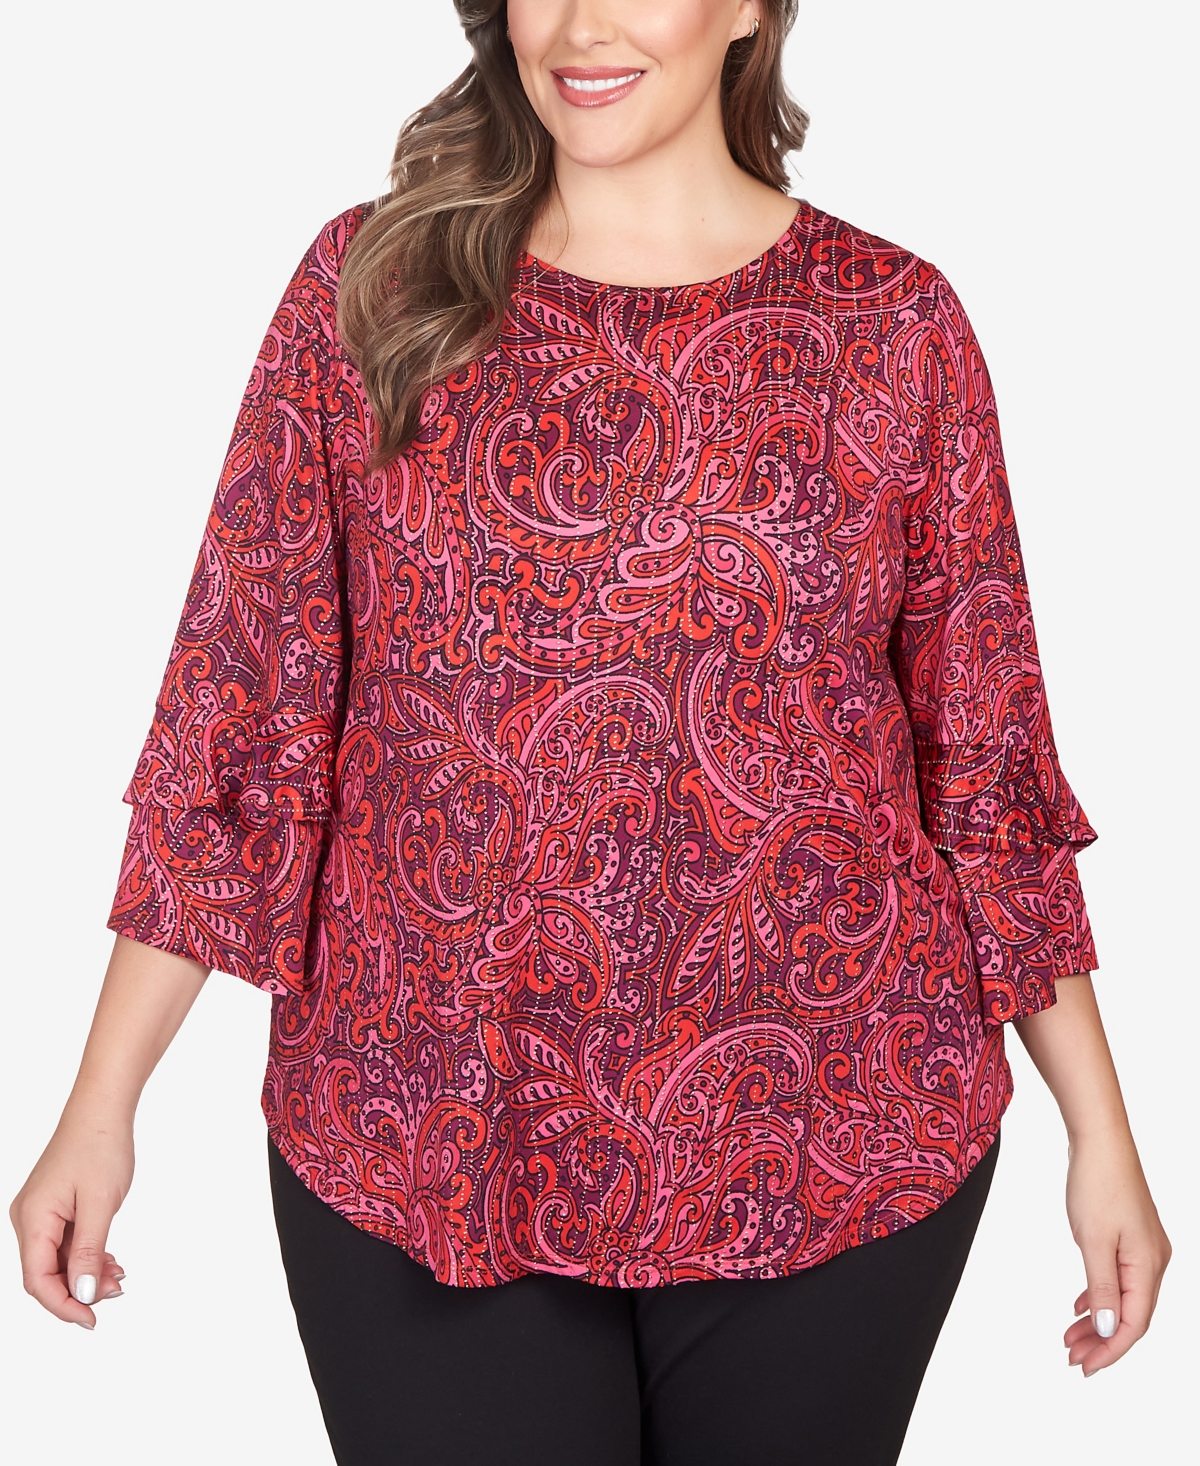 Ruby Rd. Plus Size Paisley Dew Drop Knit Top With Ruffle Sleeves In Lipstick Multi